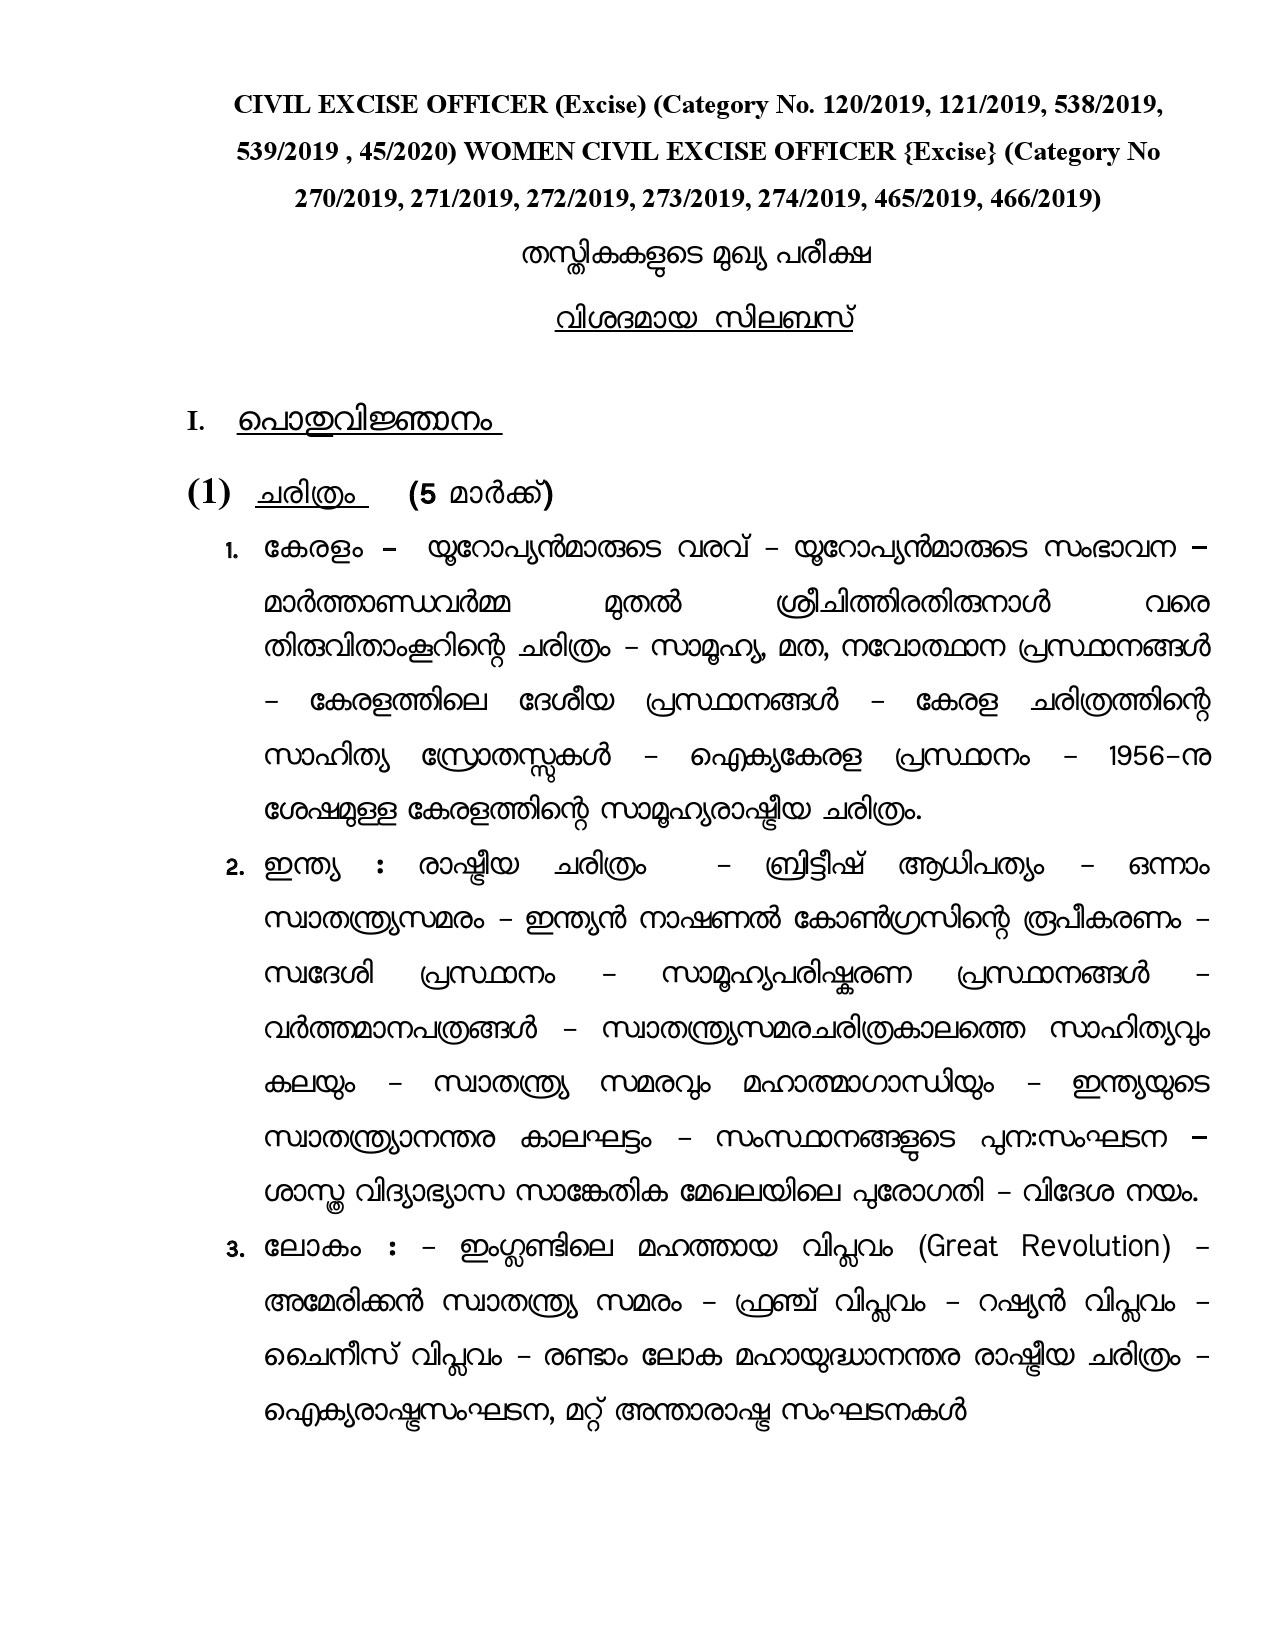 Civil Excise Officer Final Examination Syllabus For Plus Two Level - Notification Image 2